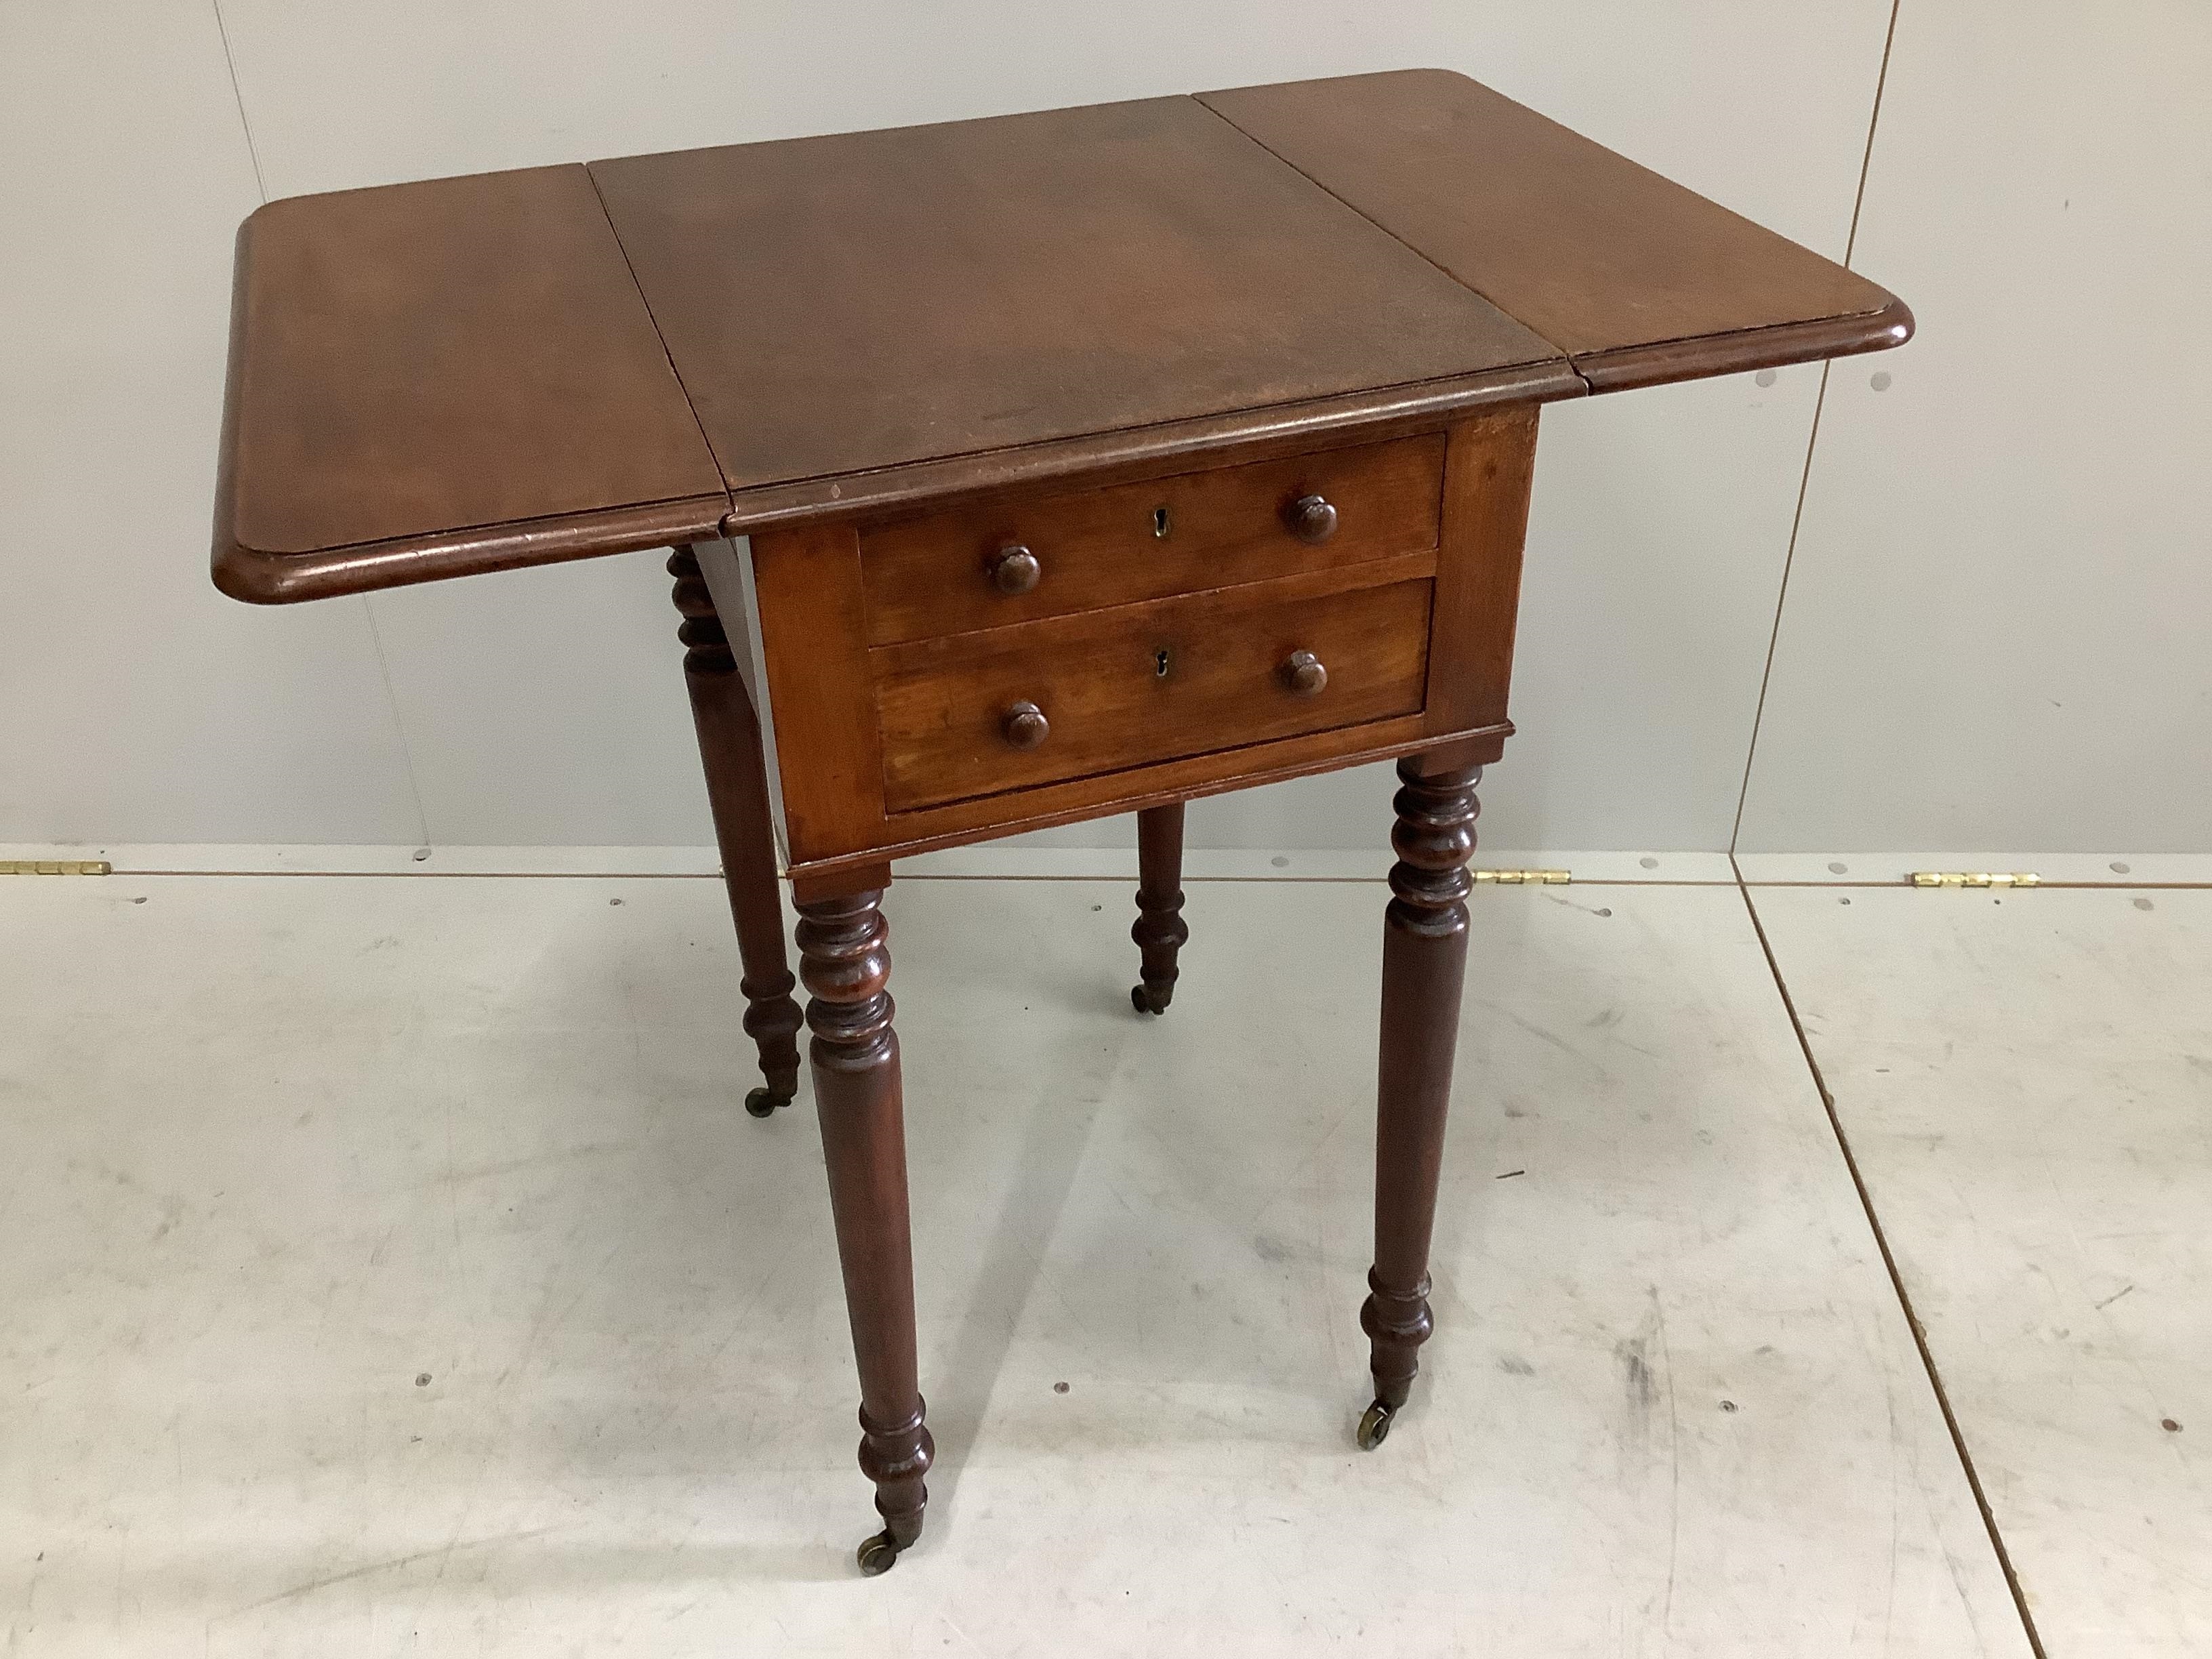 An early Victorian mahogany drop flap work table, width 40cm, depth 50cm, height 74cm (a.f.) - Image 2 of 2